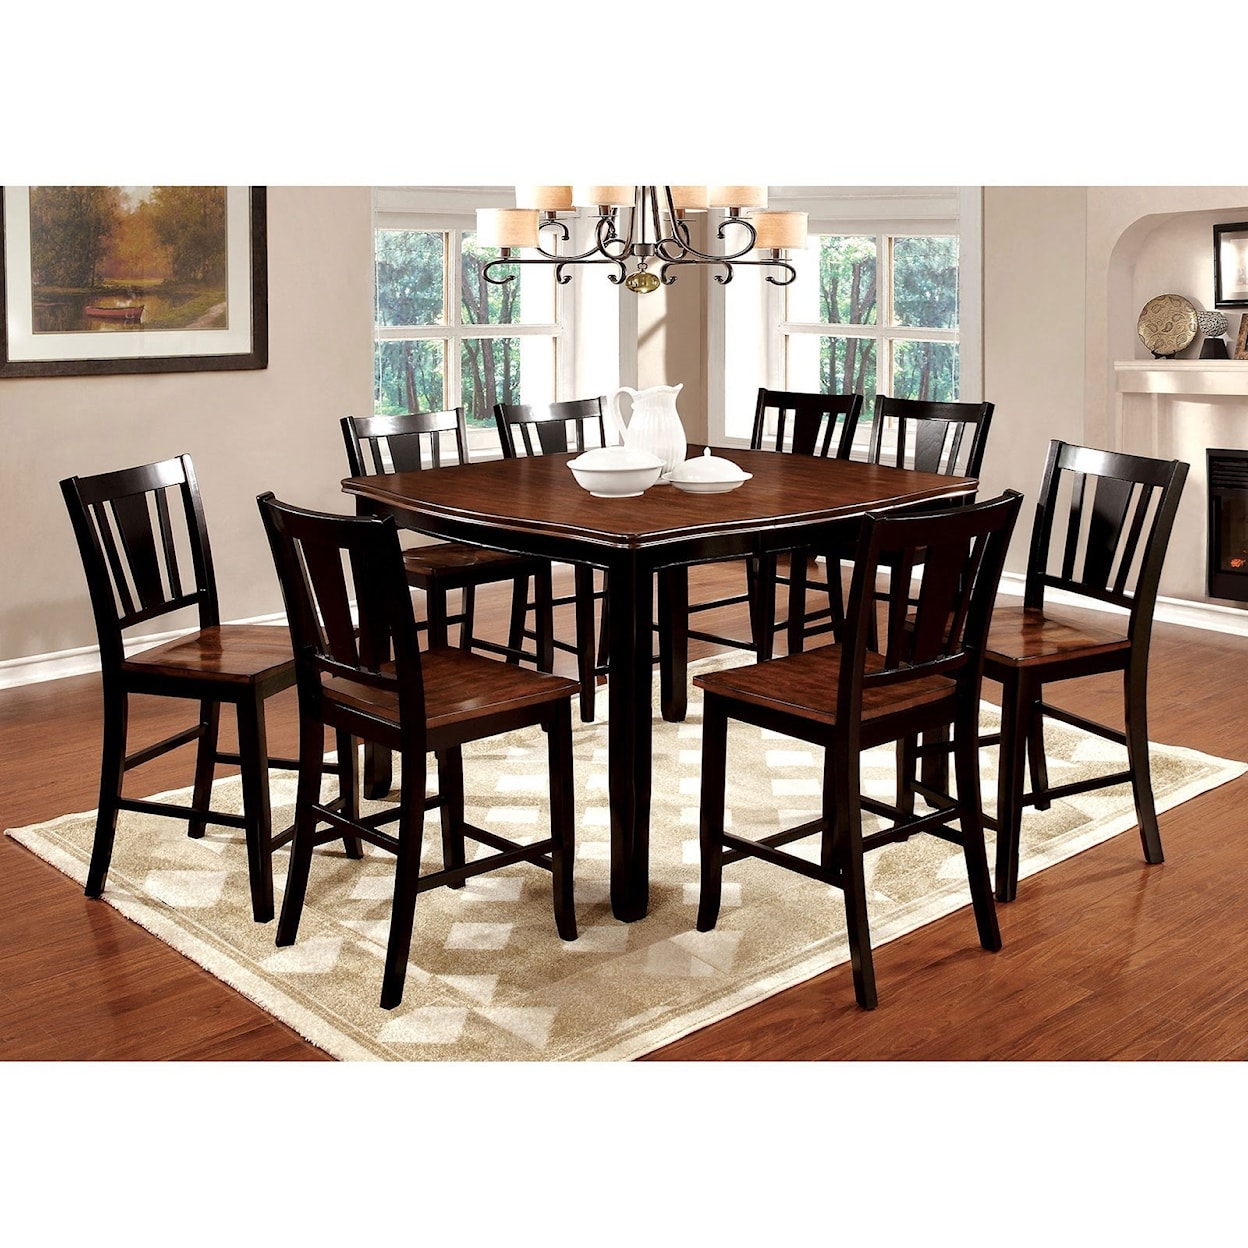 Furniture of America Dover II 9 Pc Counter Height Dining Set